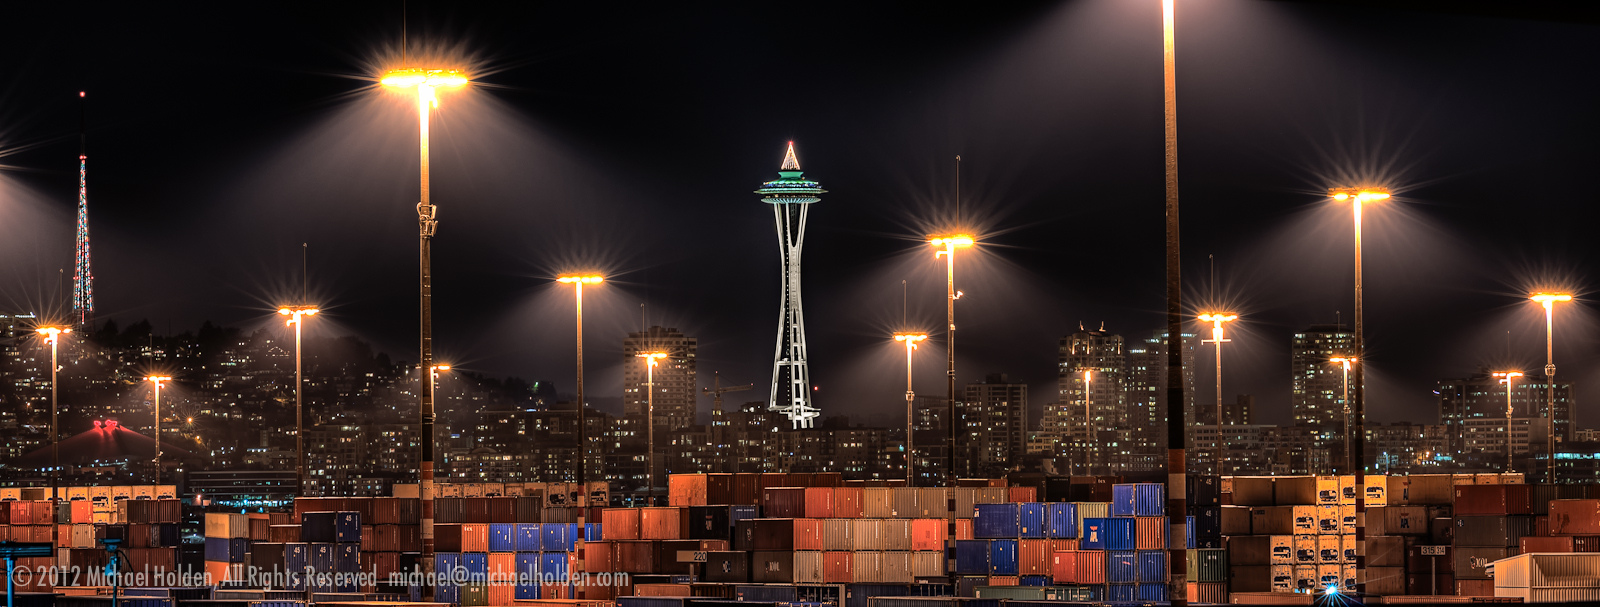 Containers at Seattle port